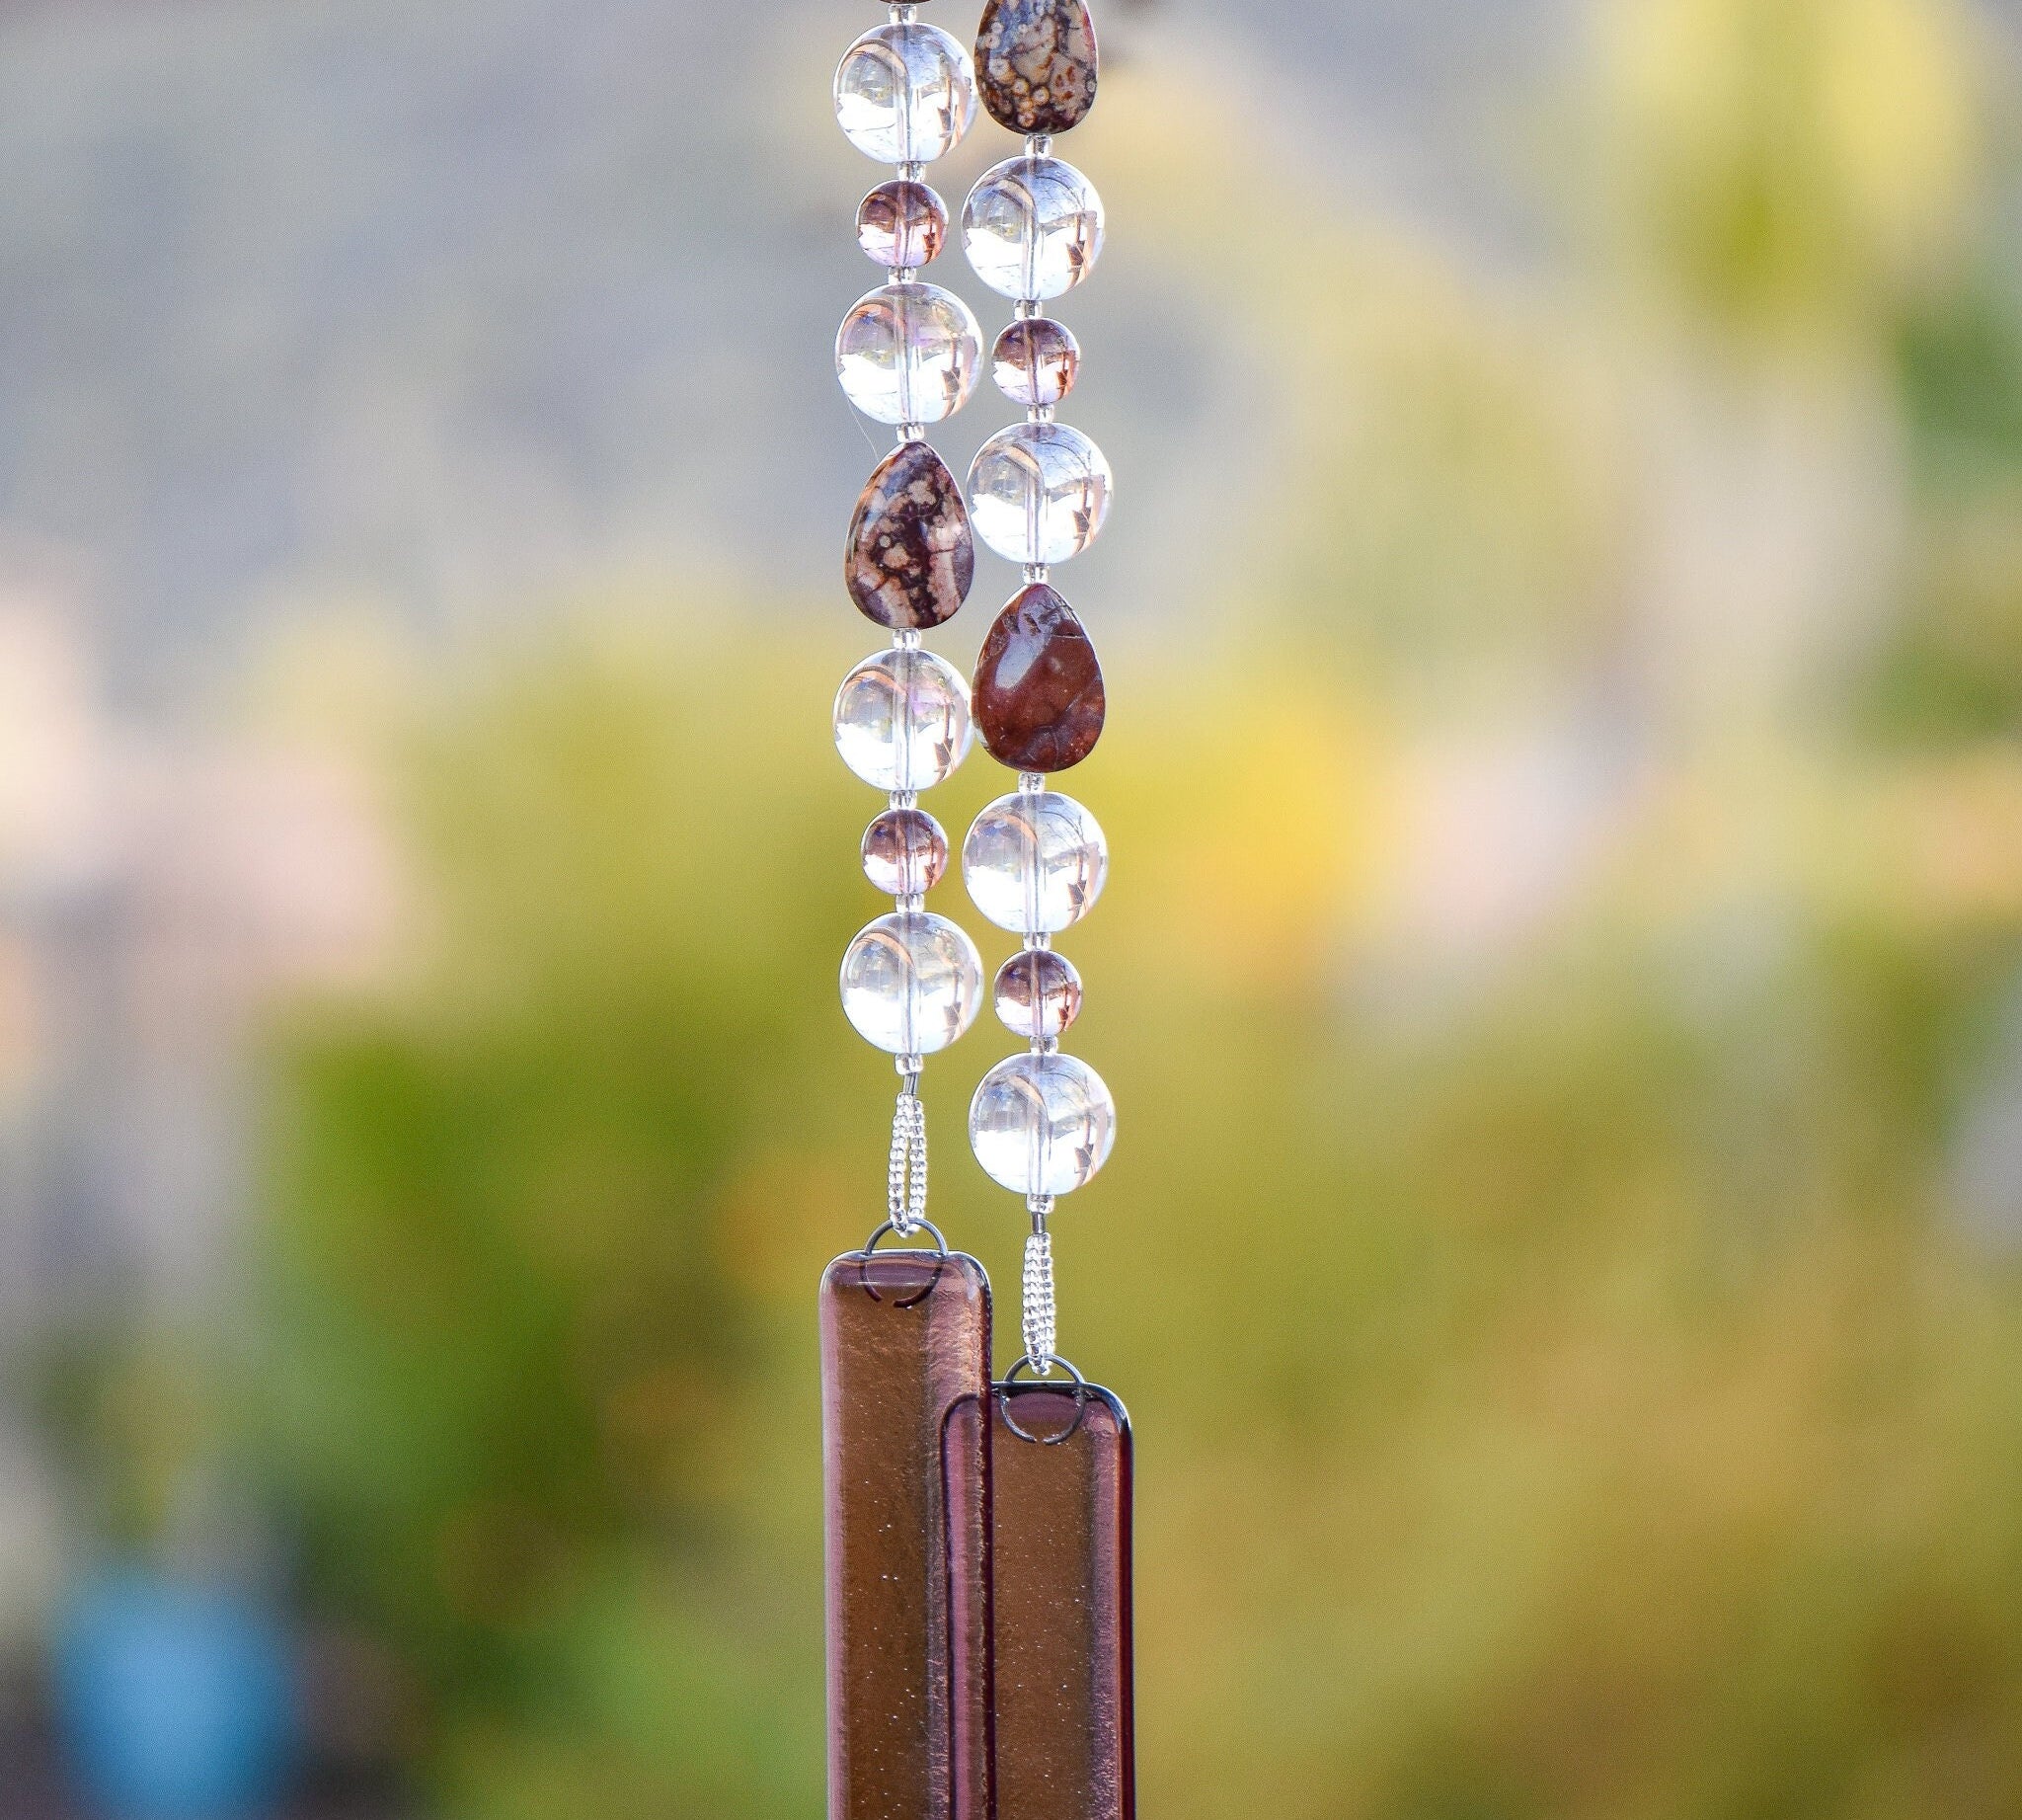 Tear-drop shaped rhyolite stones are strung with large clear glass beads and smaller pale purple beads. Anchored by two pieces of pale purple glass. Hanging from tree.